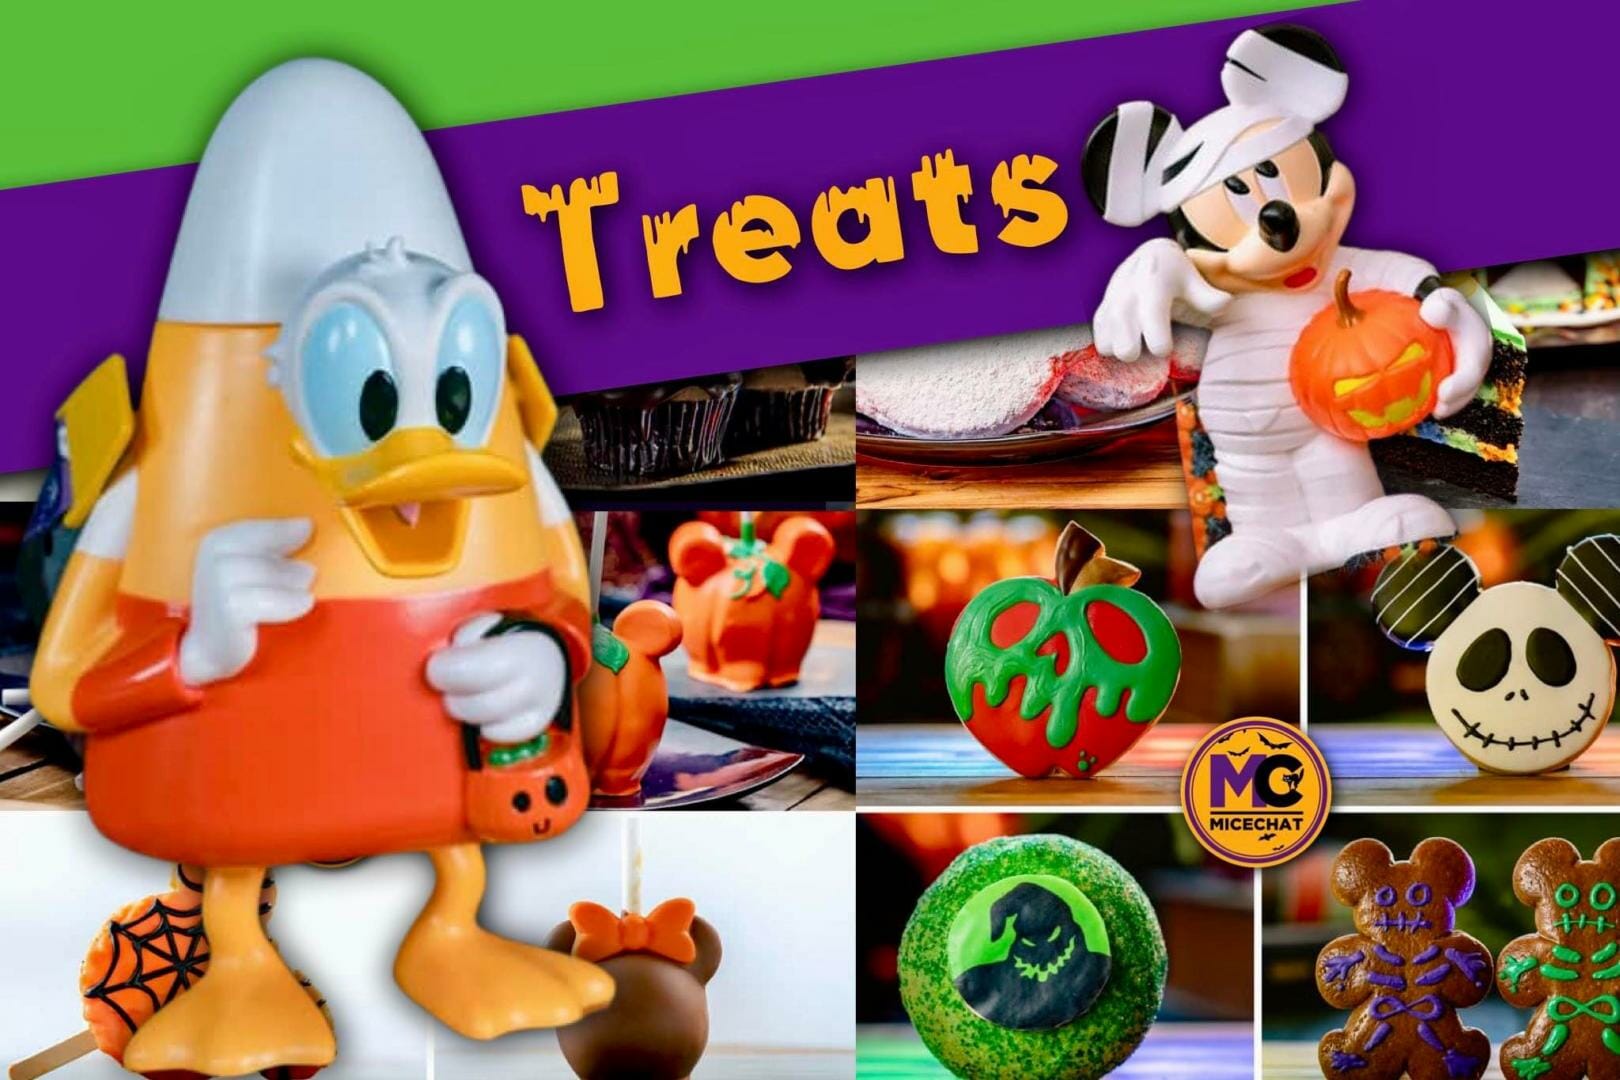 REVIEW: Some Halloween Offerings are Tricks at DCA